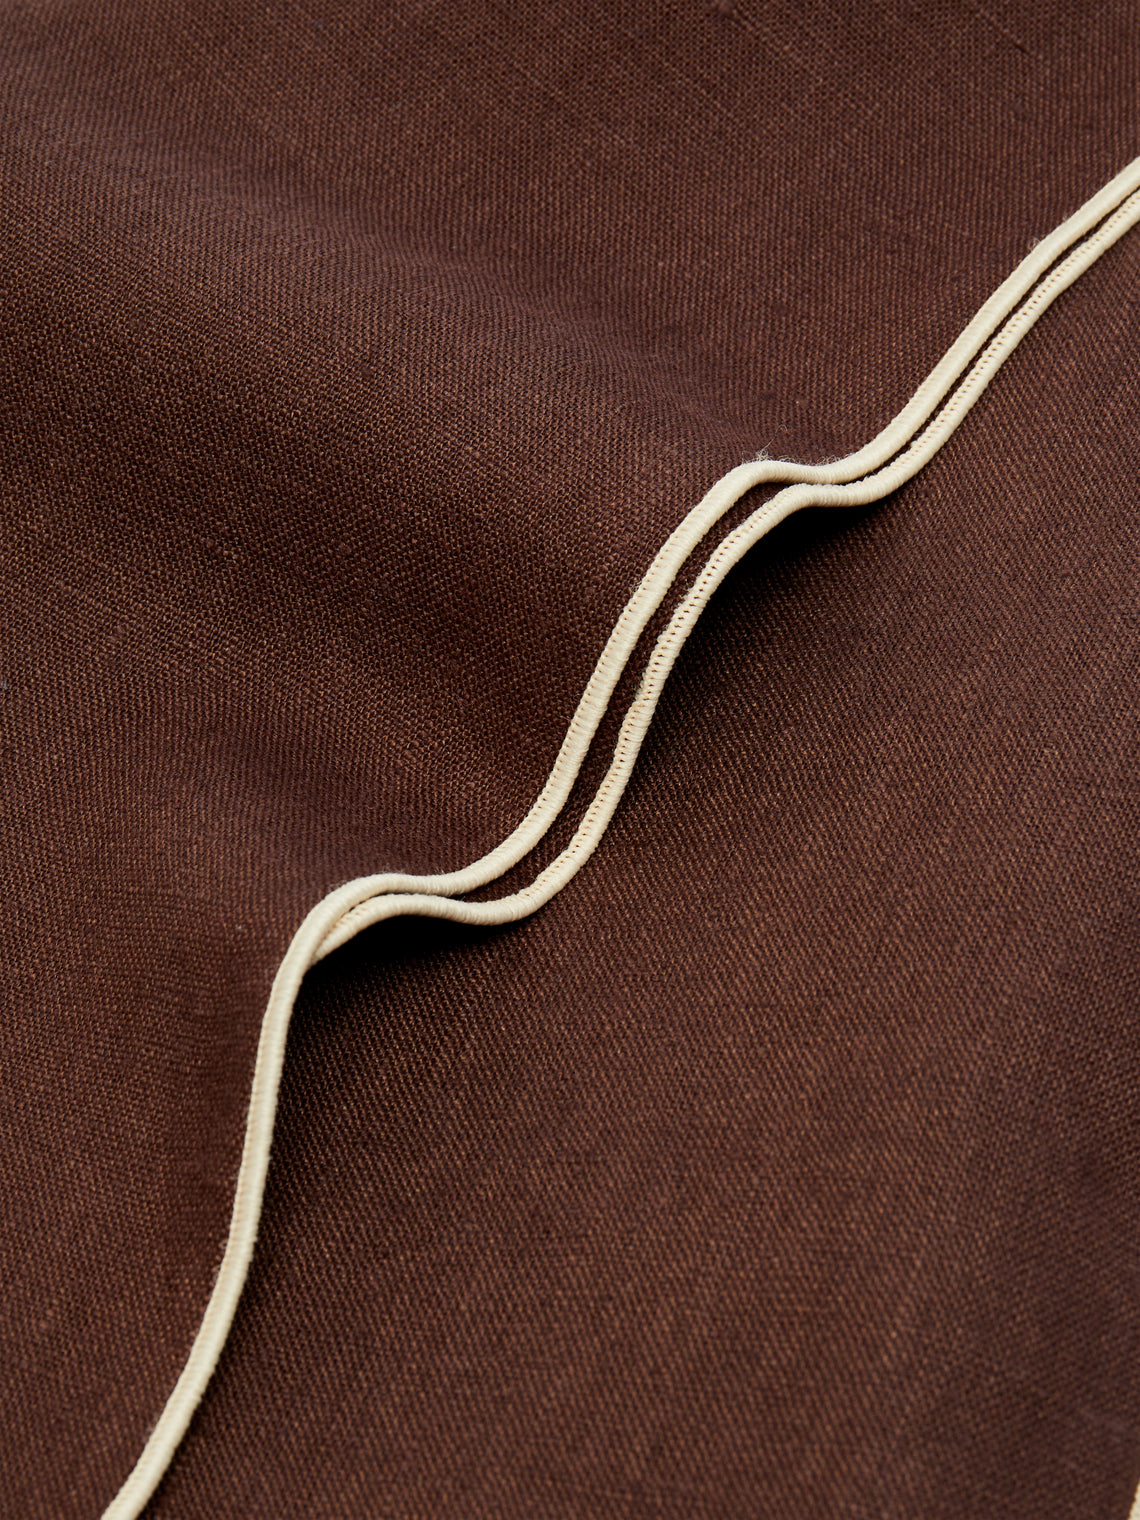 Madre Linen - Hand-Dyed Linen Contrast-Edge Tablecloth - Brown - ABASK